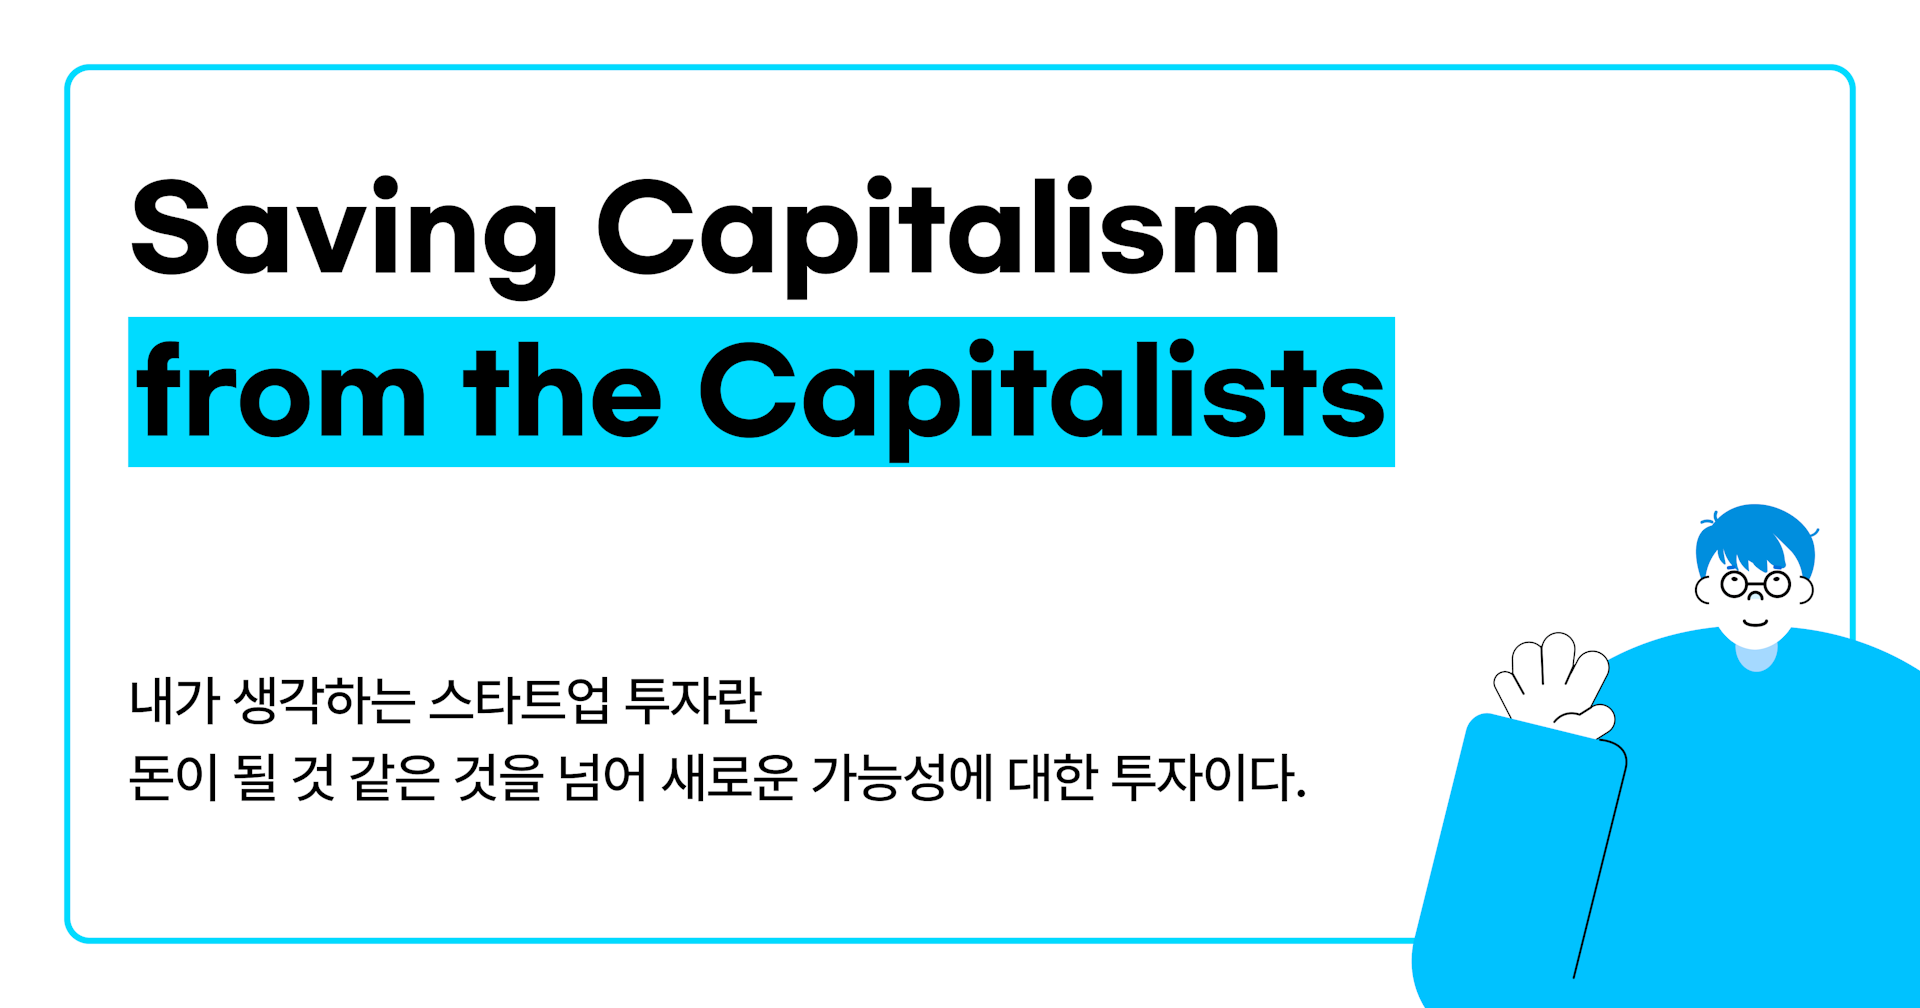 Saving capitalism from the capitalists